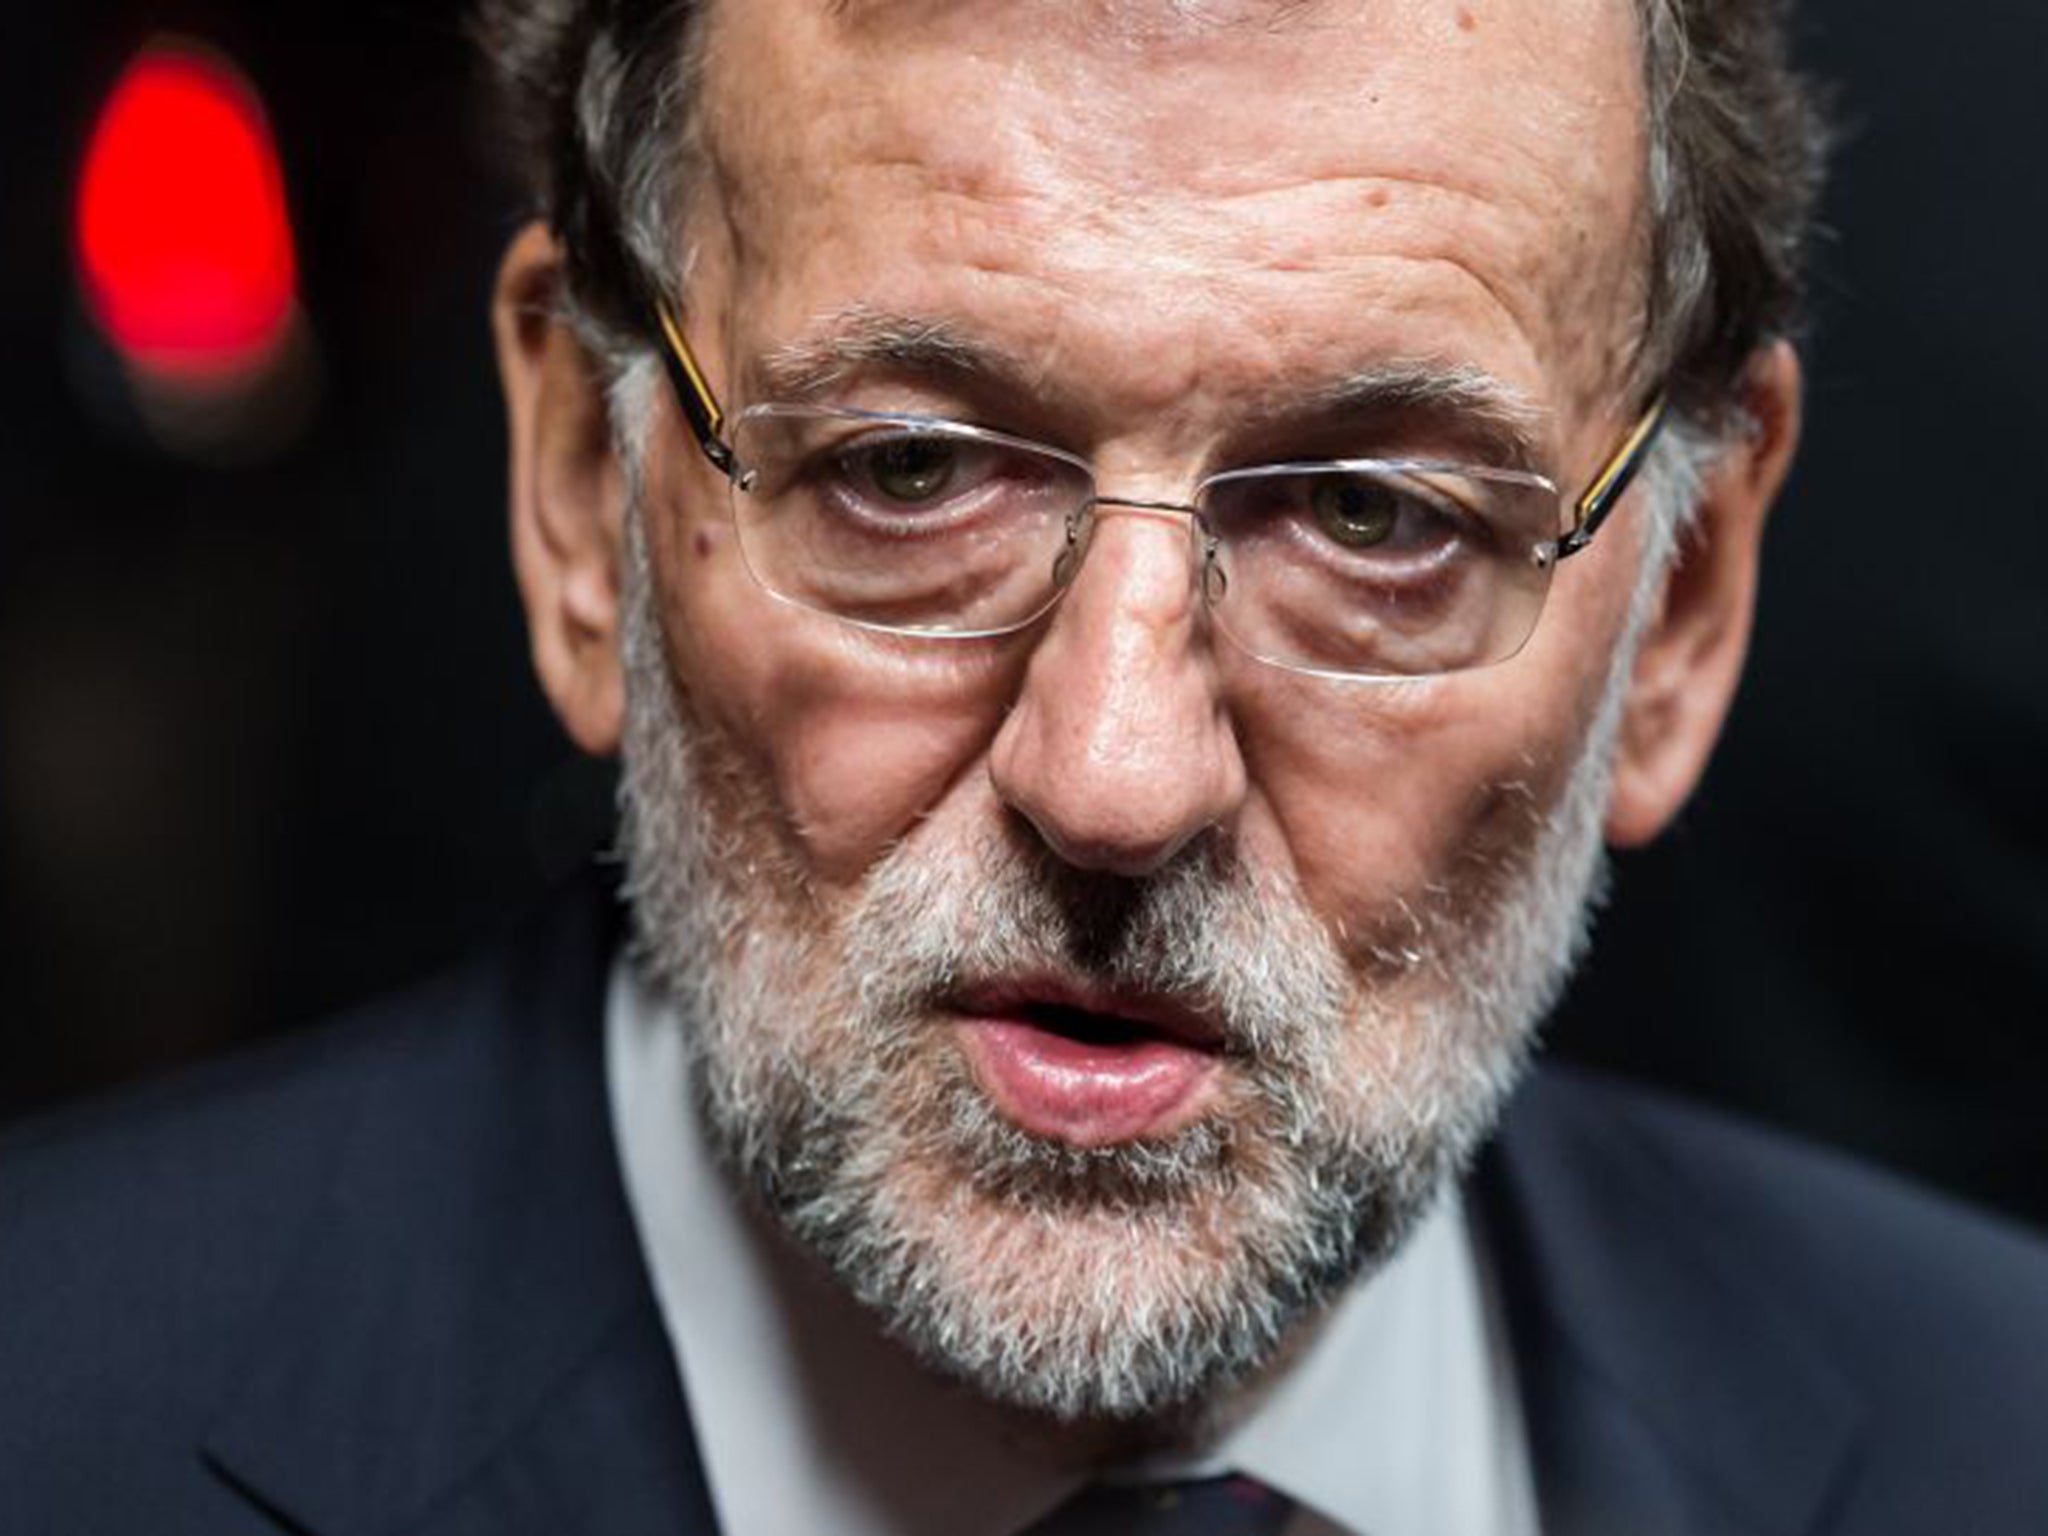 Spain's Prime Minister Mariano Rajoy has warned against voters supporting secession